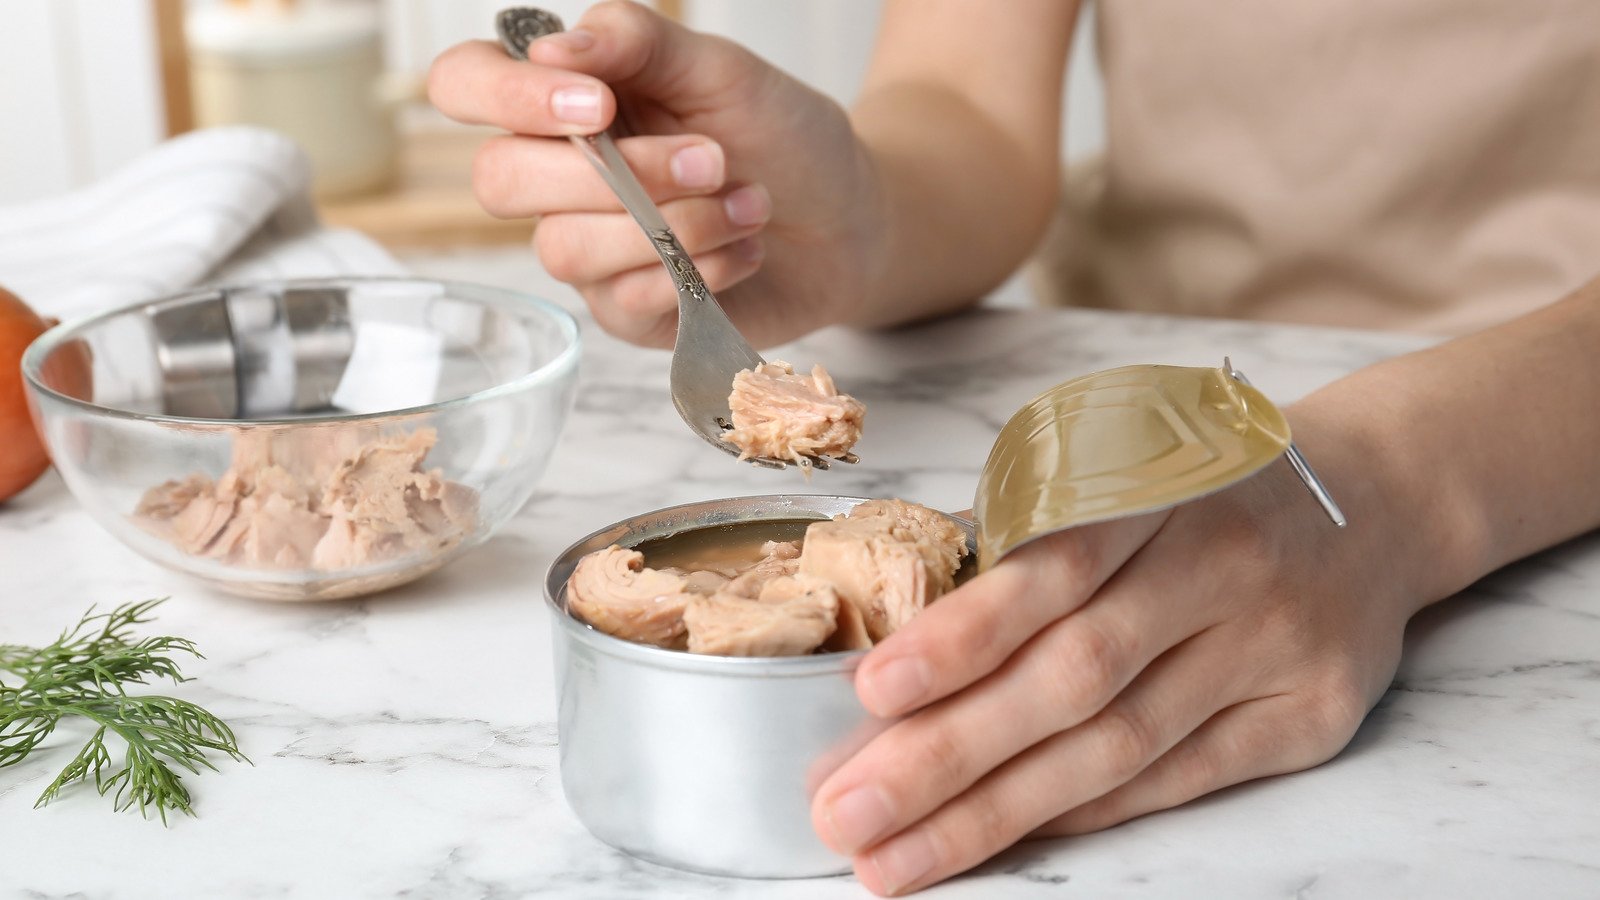 Read This Before Eating Another Bite Of Canned Tuna